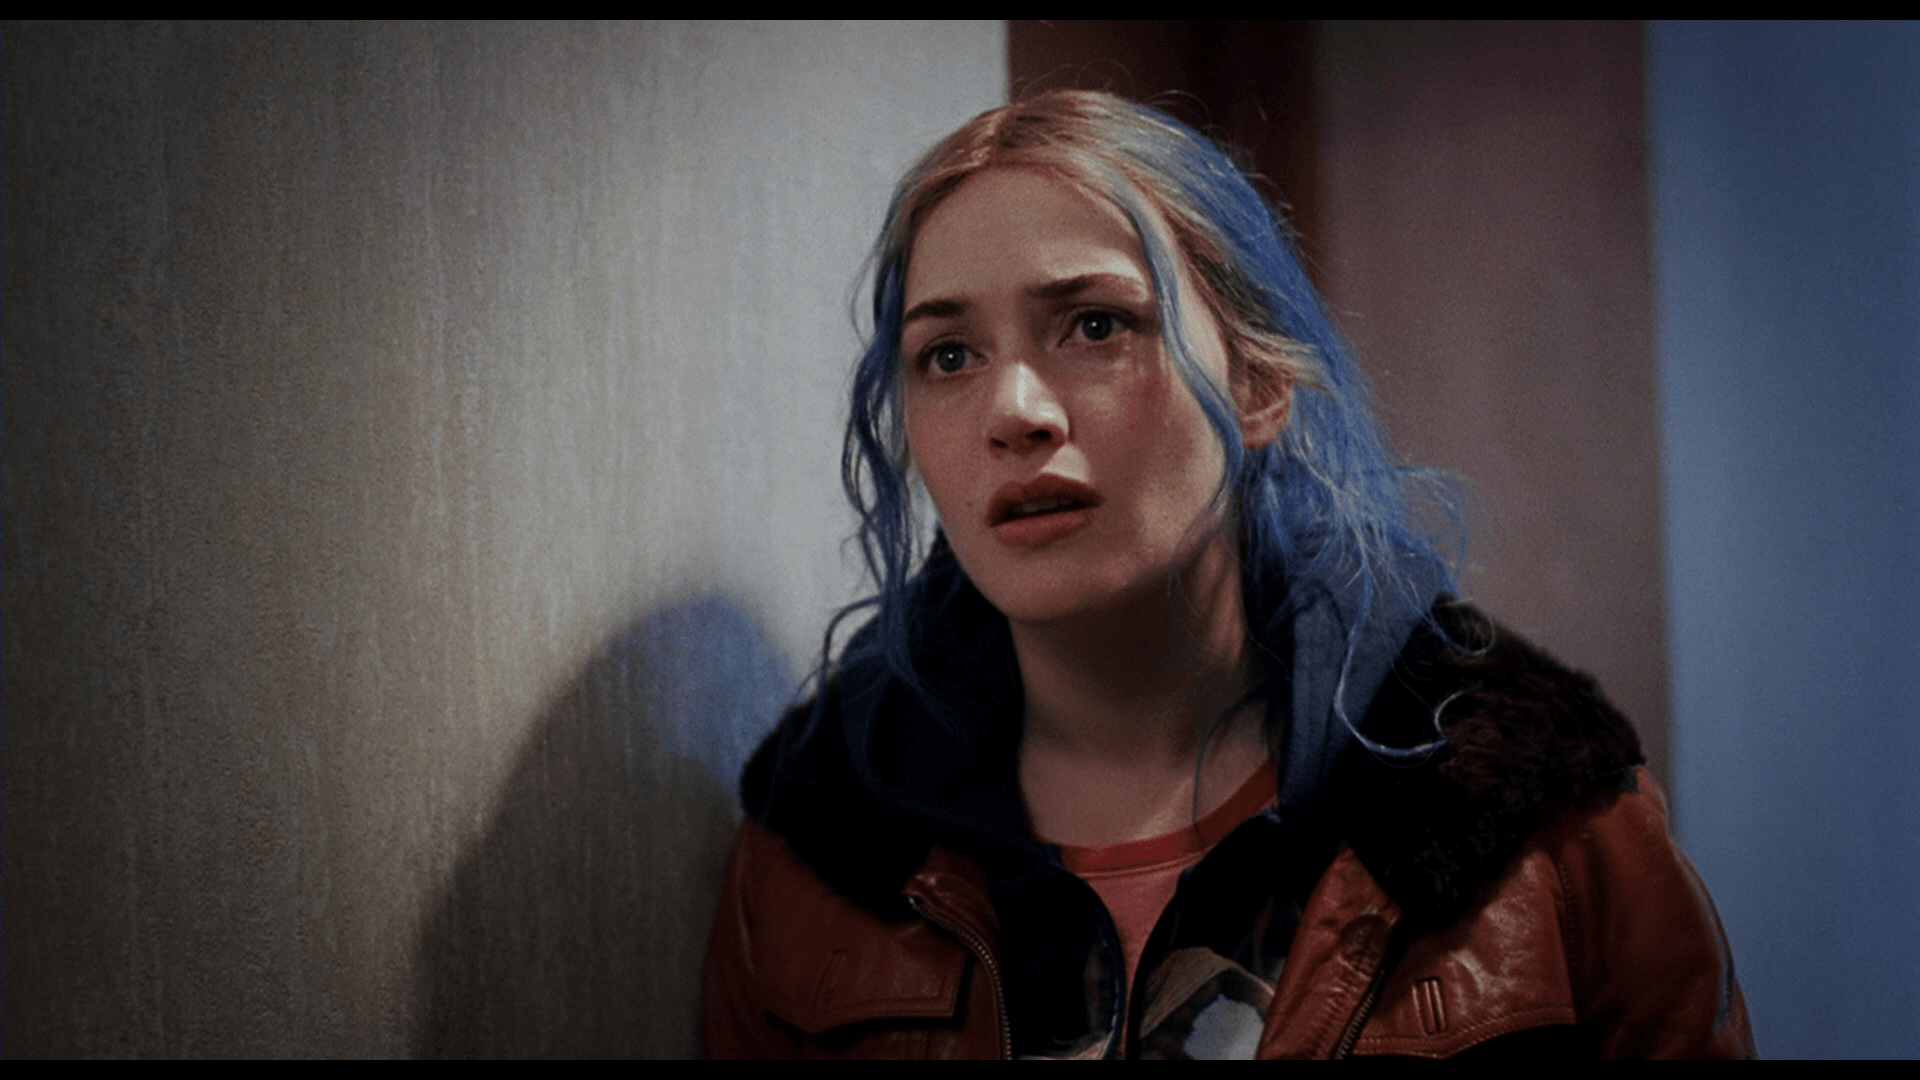 Movies That Everyone Should See “Eternal Sunshine of the Spotless